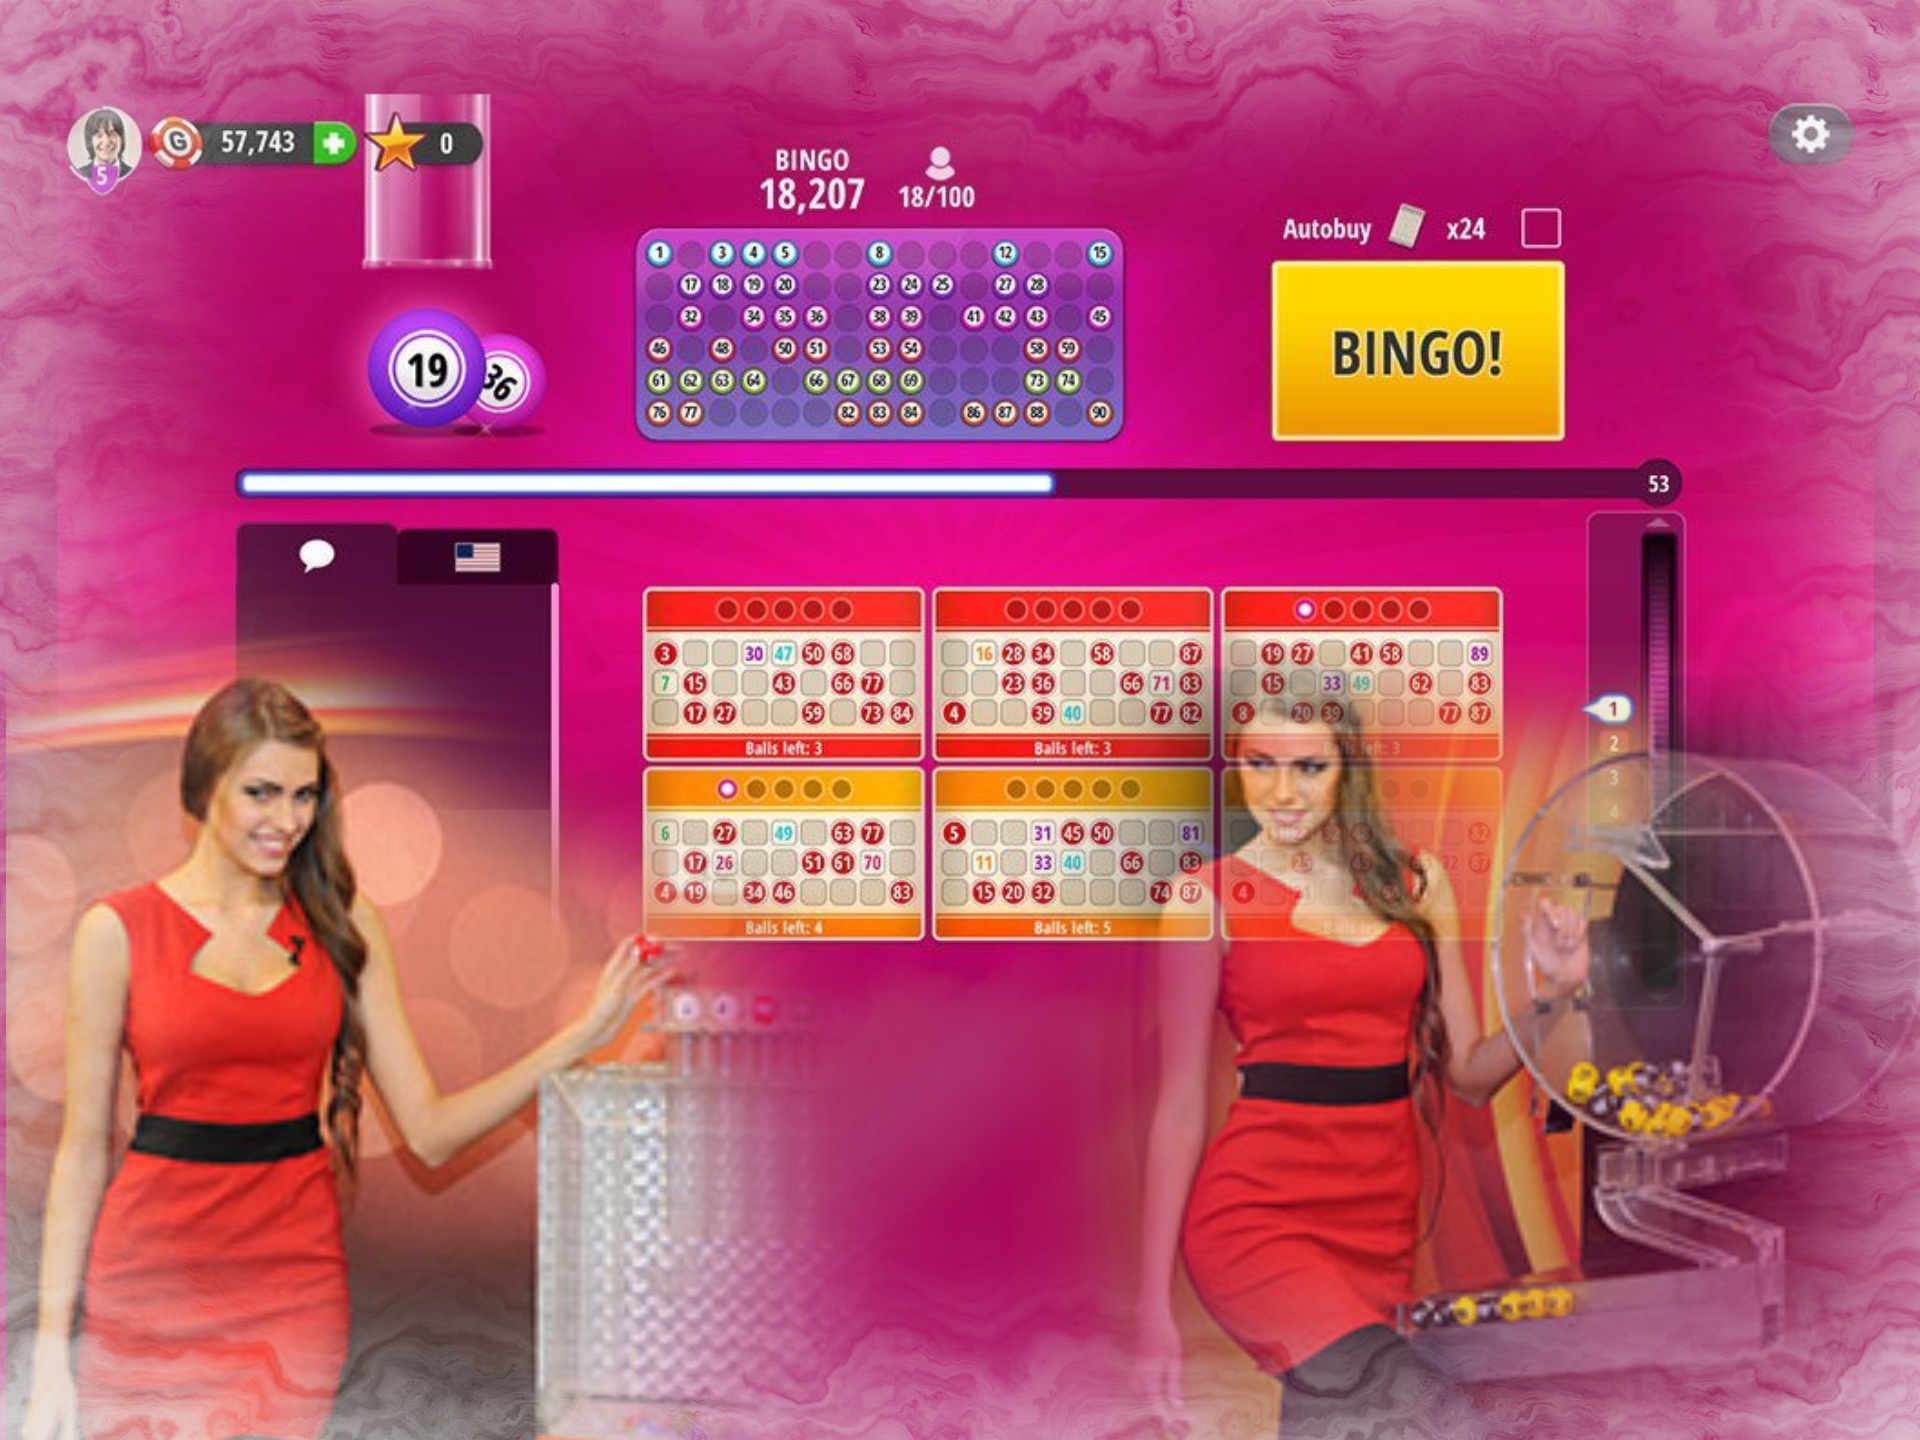 Study the online bingo rules carefully before starting to play.